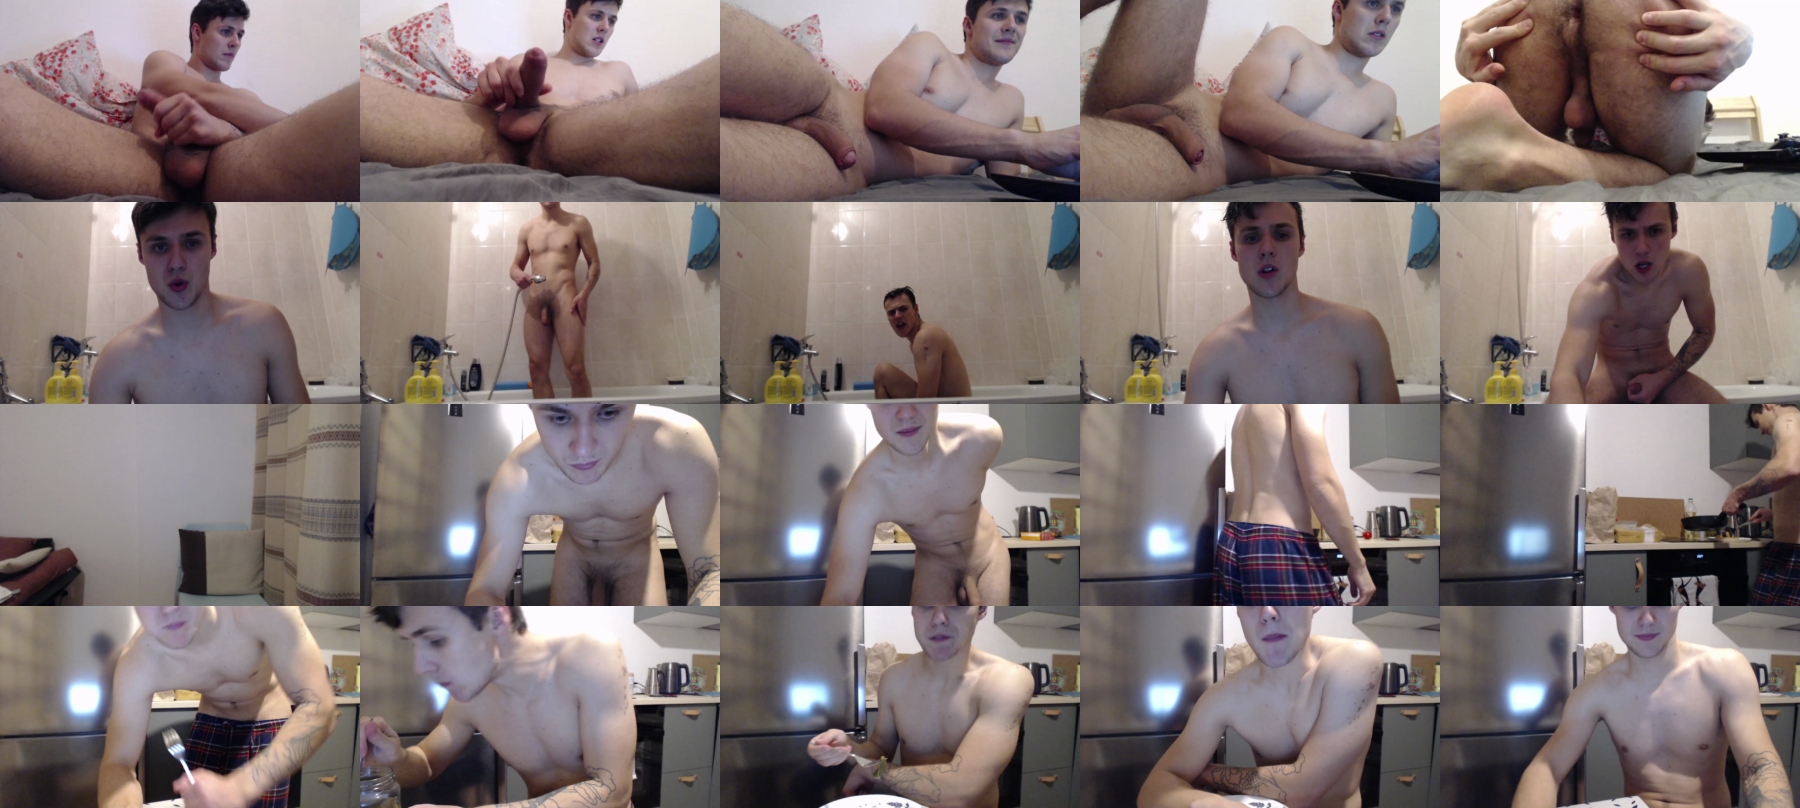 Sexyrussianboys  19-11-2021 video stockins